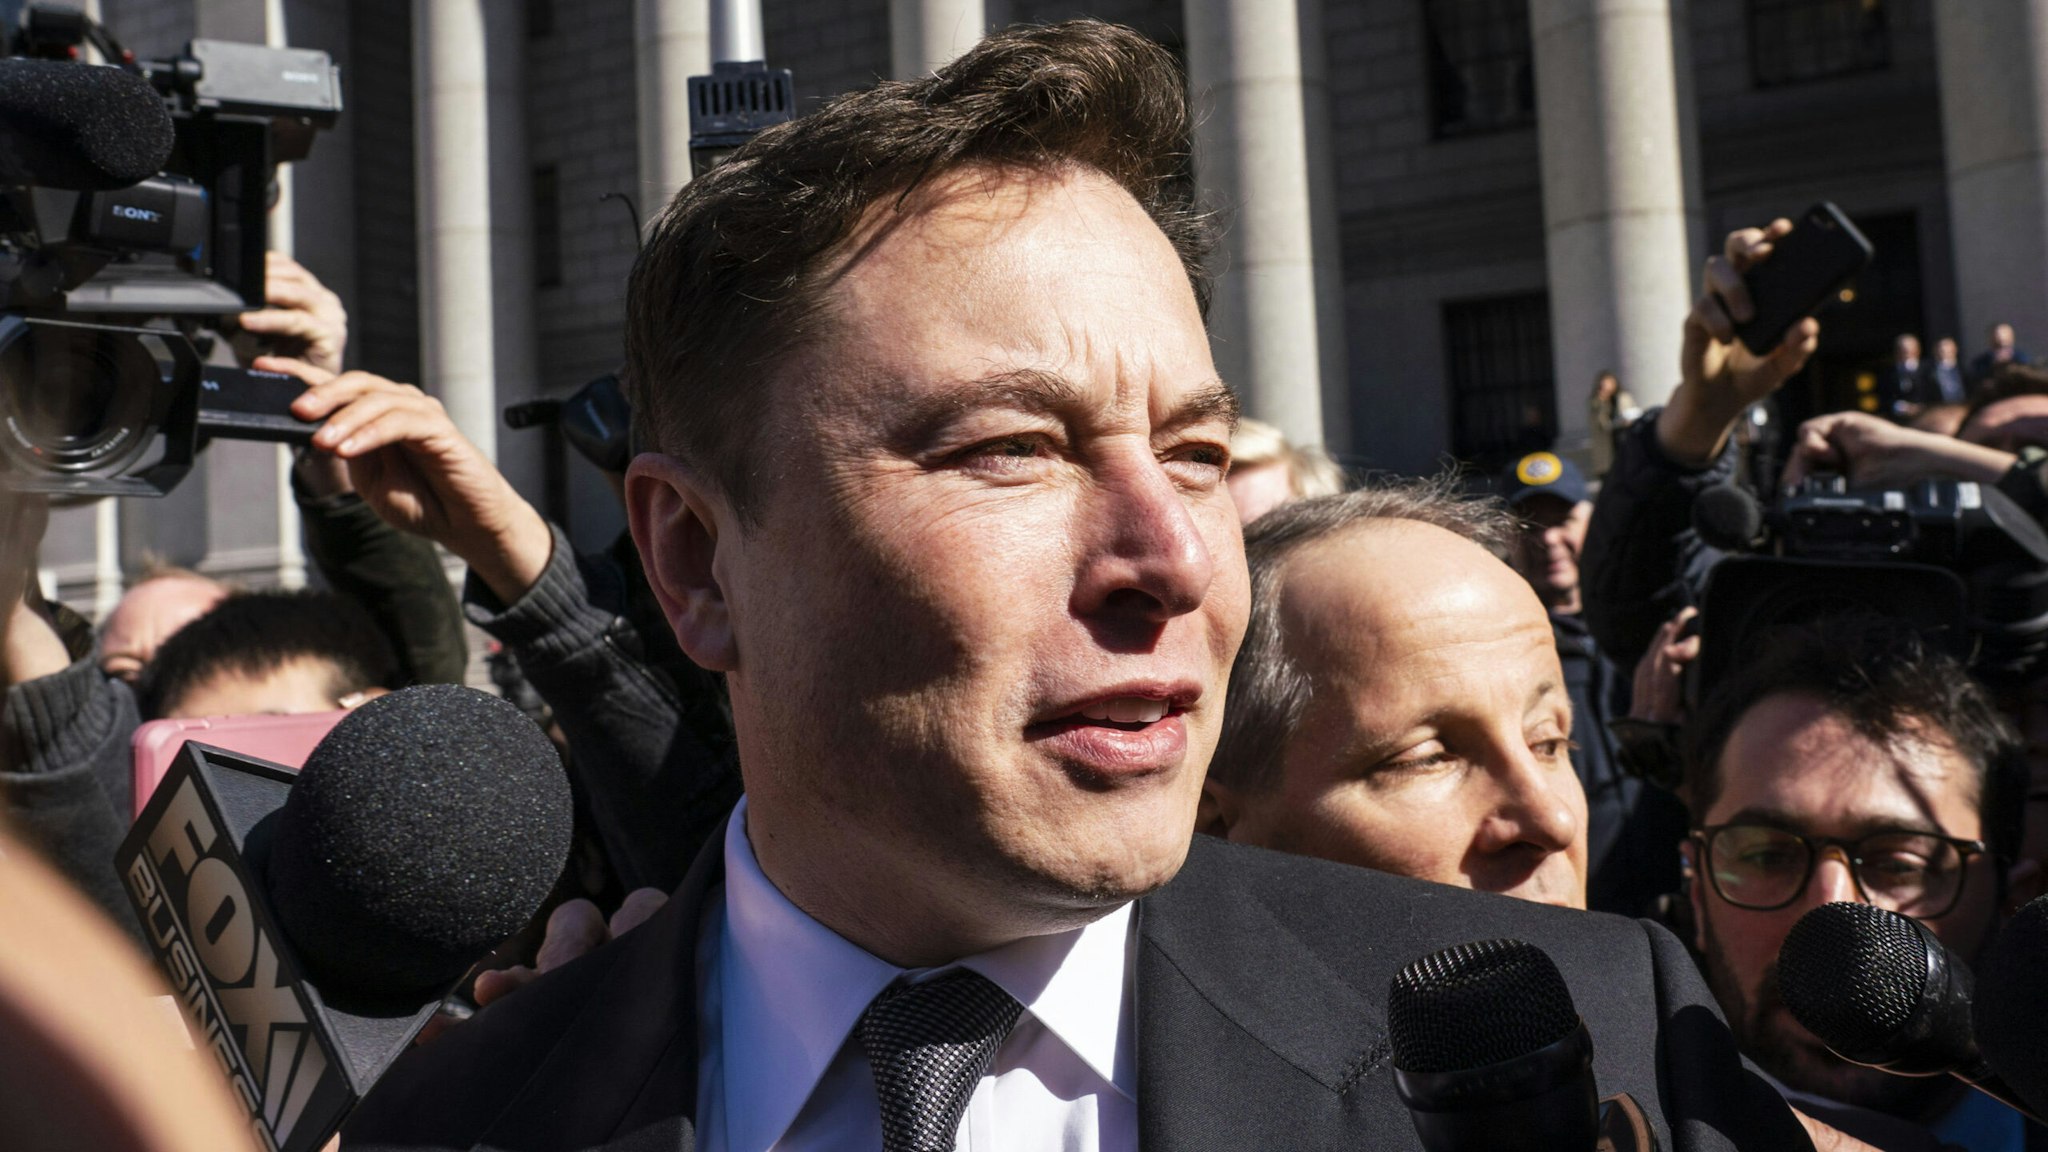 Elon Musk, chief executive officer of Tesla Inc., speaks to members of the media while departing from federal court in New York, U.S., on Thursday, April 4, 2019. U.S. District Judge Alison Nathan telegraphed her initial thoughts as the SEC and Elon Musk's lawyers presented their arguments over whether the Tesla Inc. CEO should be held in contempt for tweets the agency says violated an earlier agreement.